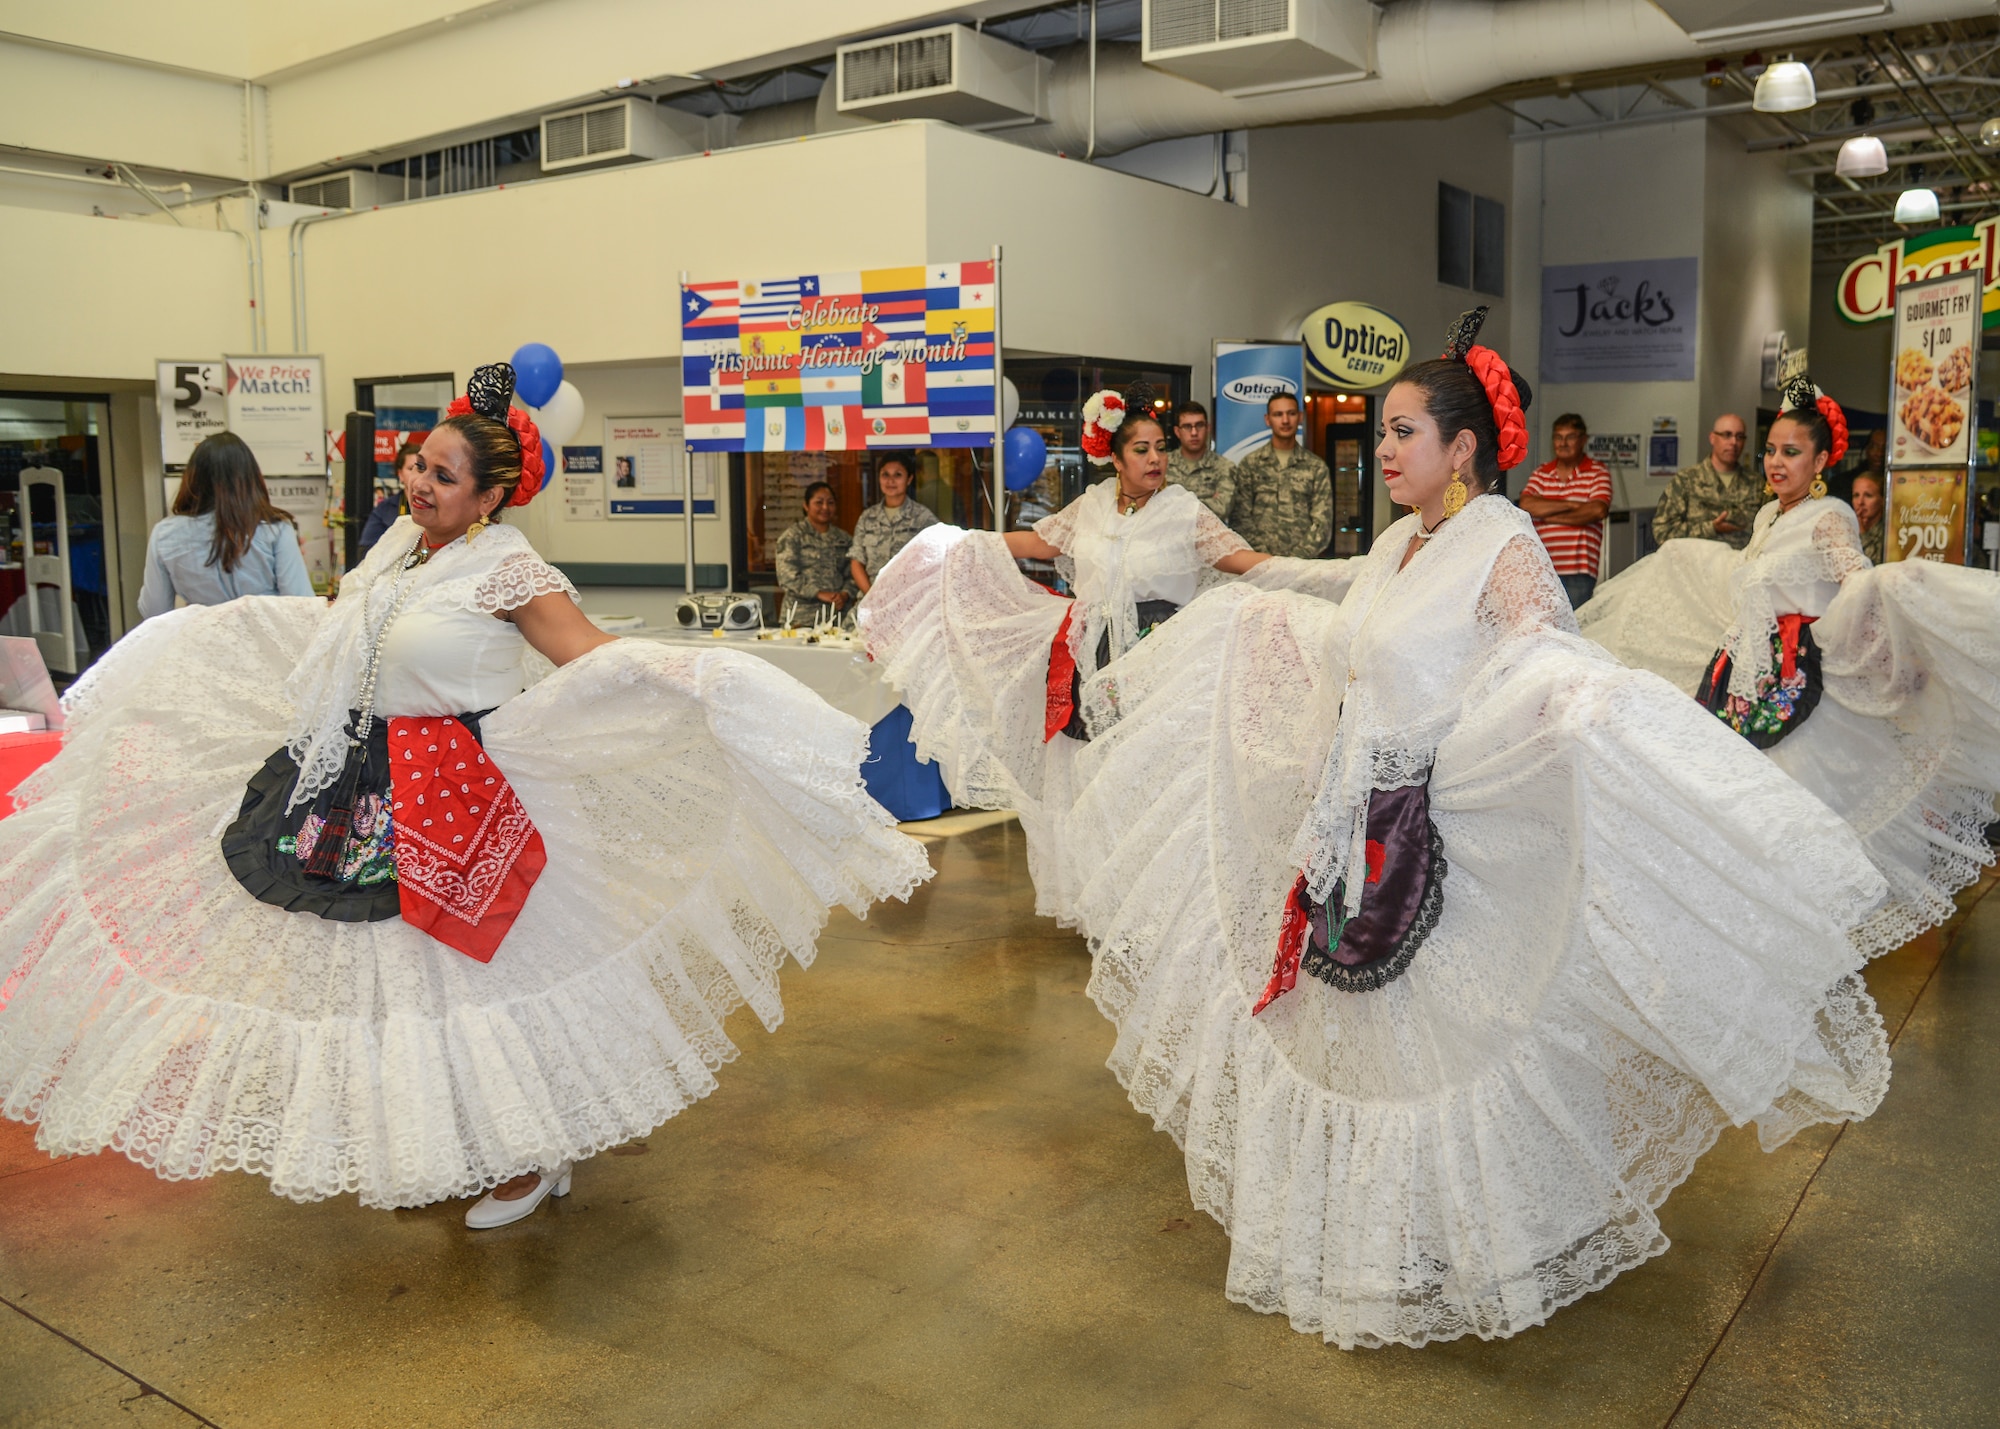 Wearing traditional gowns, the group performed several dances from the State of Veracruz. In one of the dances, “La Bamba,” the dance partners tie a bow using their feet to represent the unity of marriage. While the Ballet Folklorico Etzatlan is an all-female group, the dance is traditionally performed by a man and a woman. (U.S. Air Force photo by Rebecca Amber)